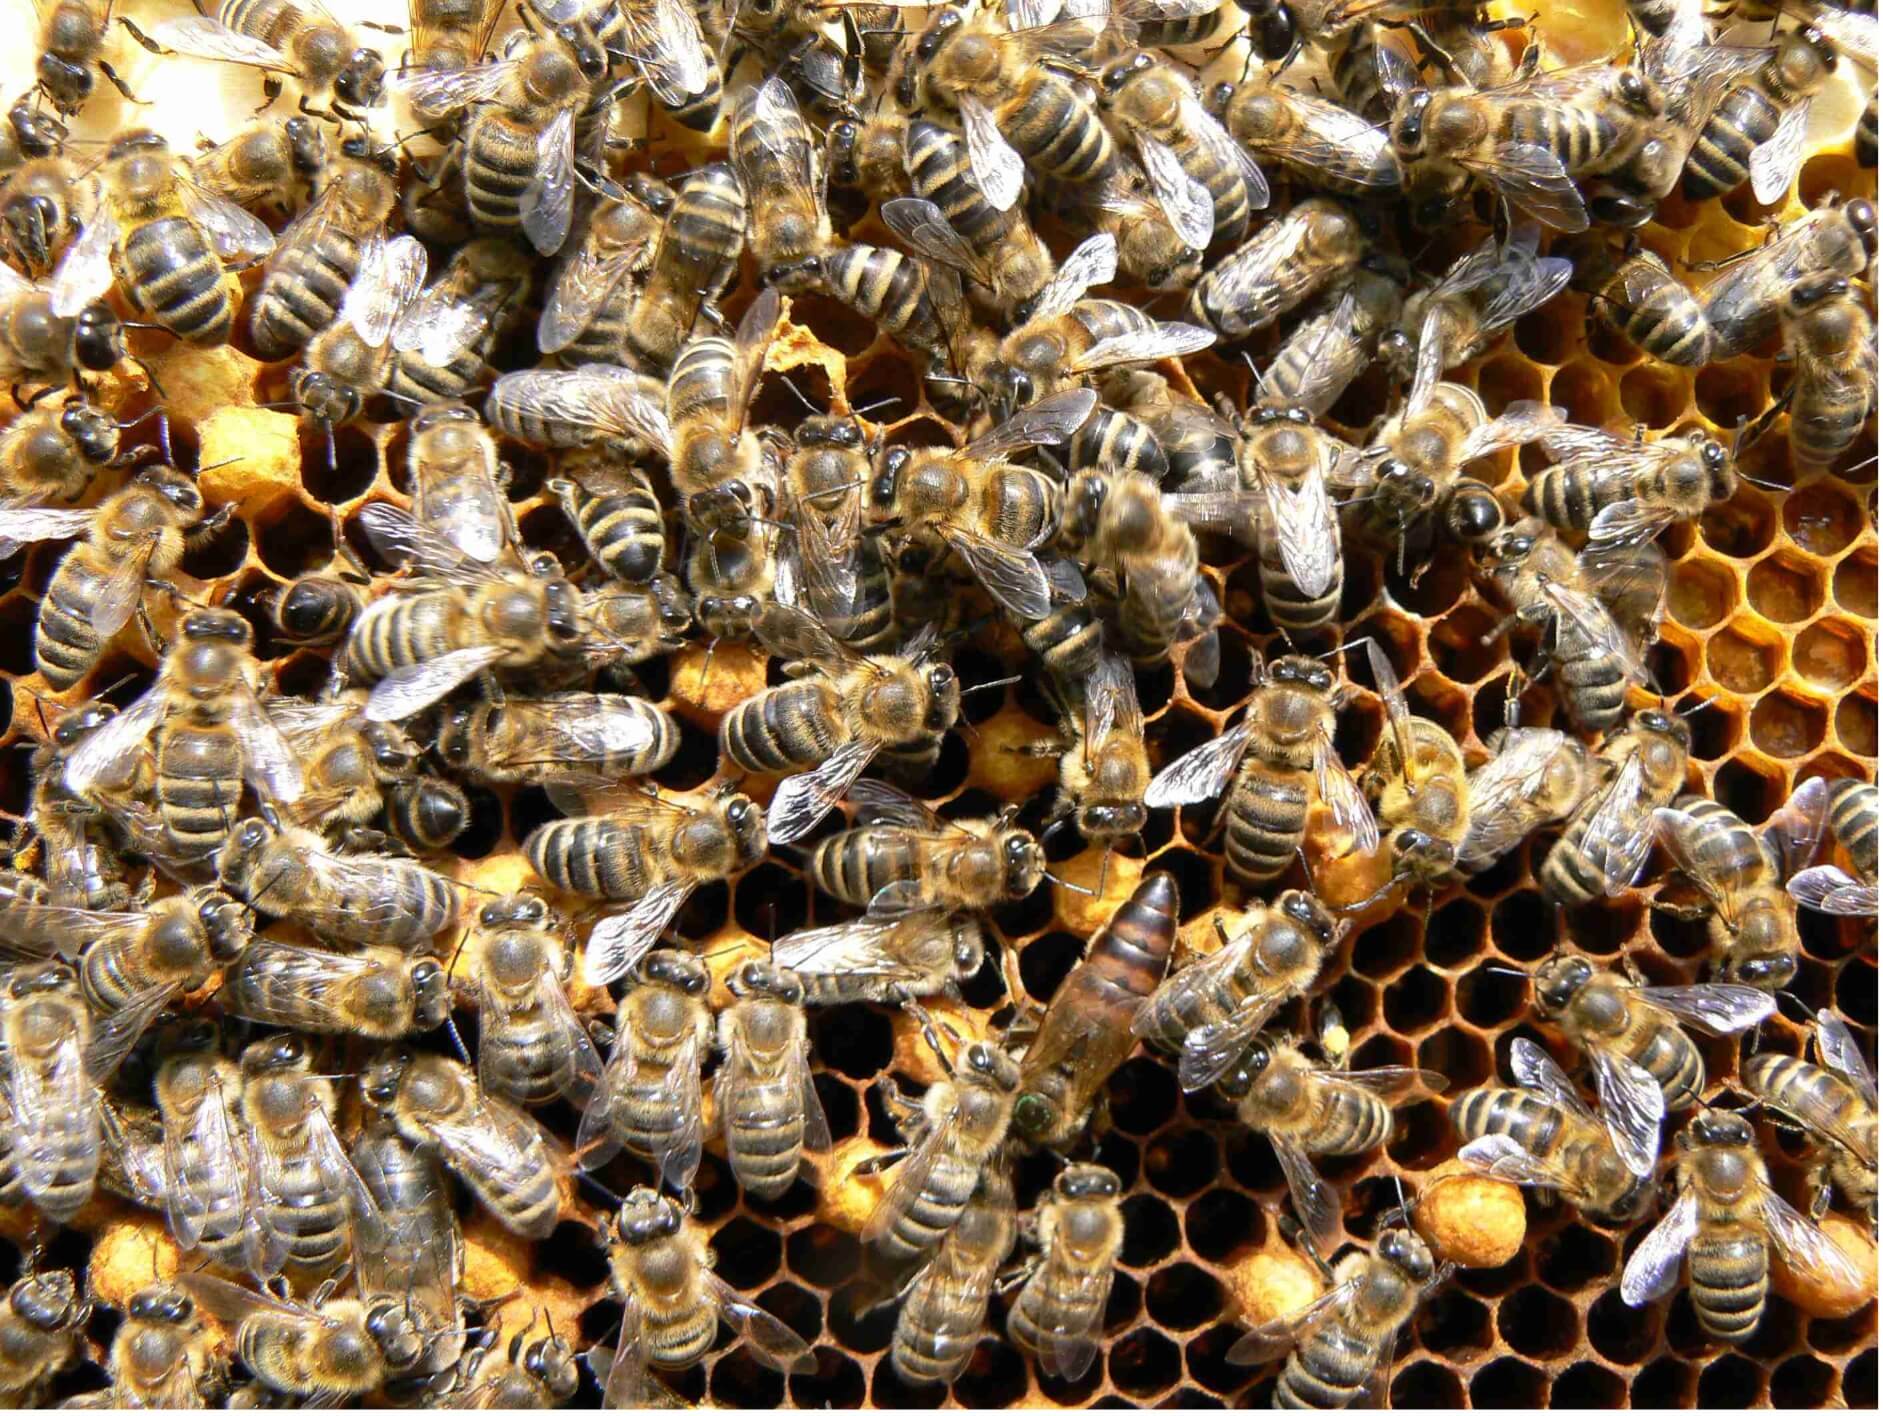 Here's all the buzz about honeybees